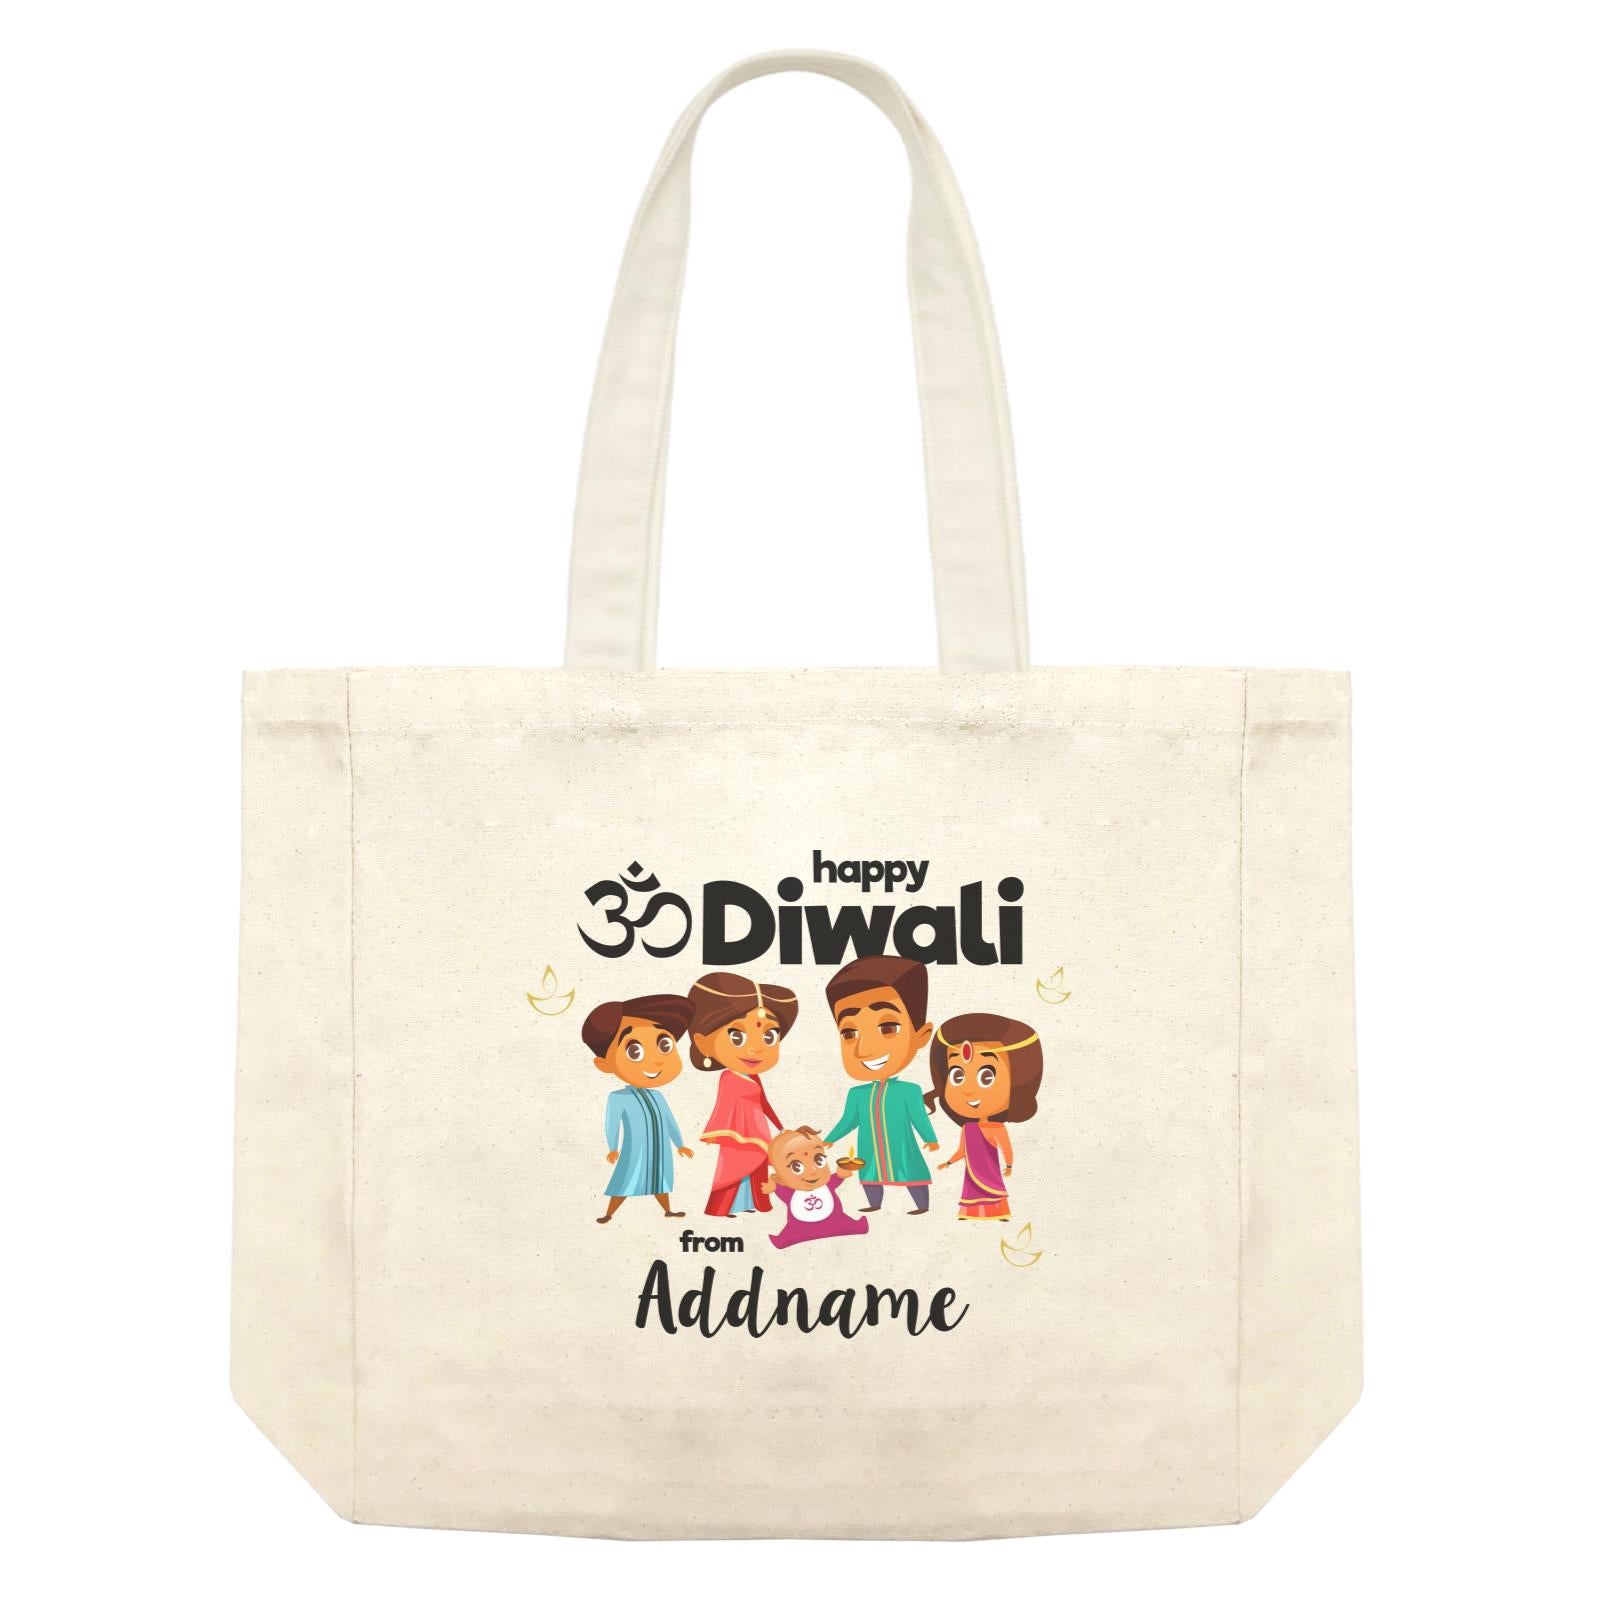 Cute Family Of Five OM Happy Diwali From Addname Shopping Bag